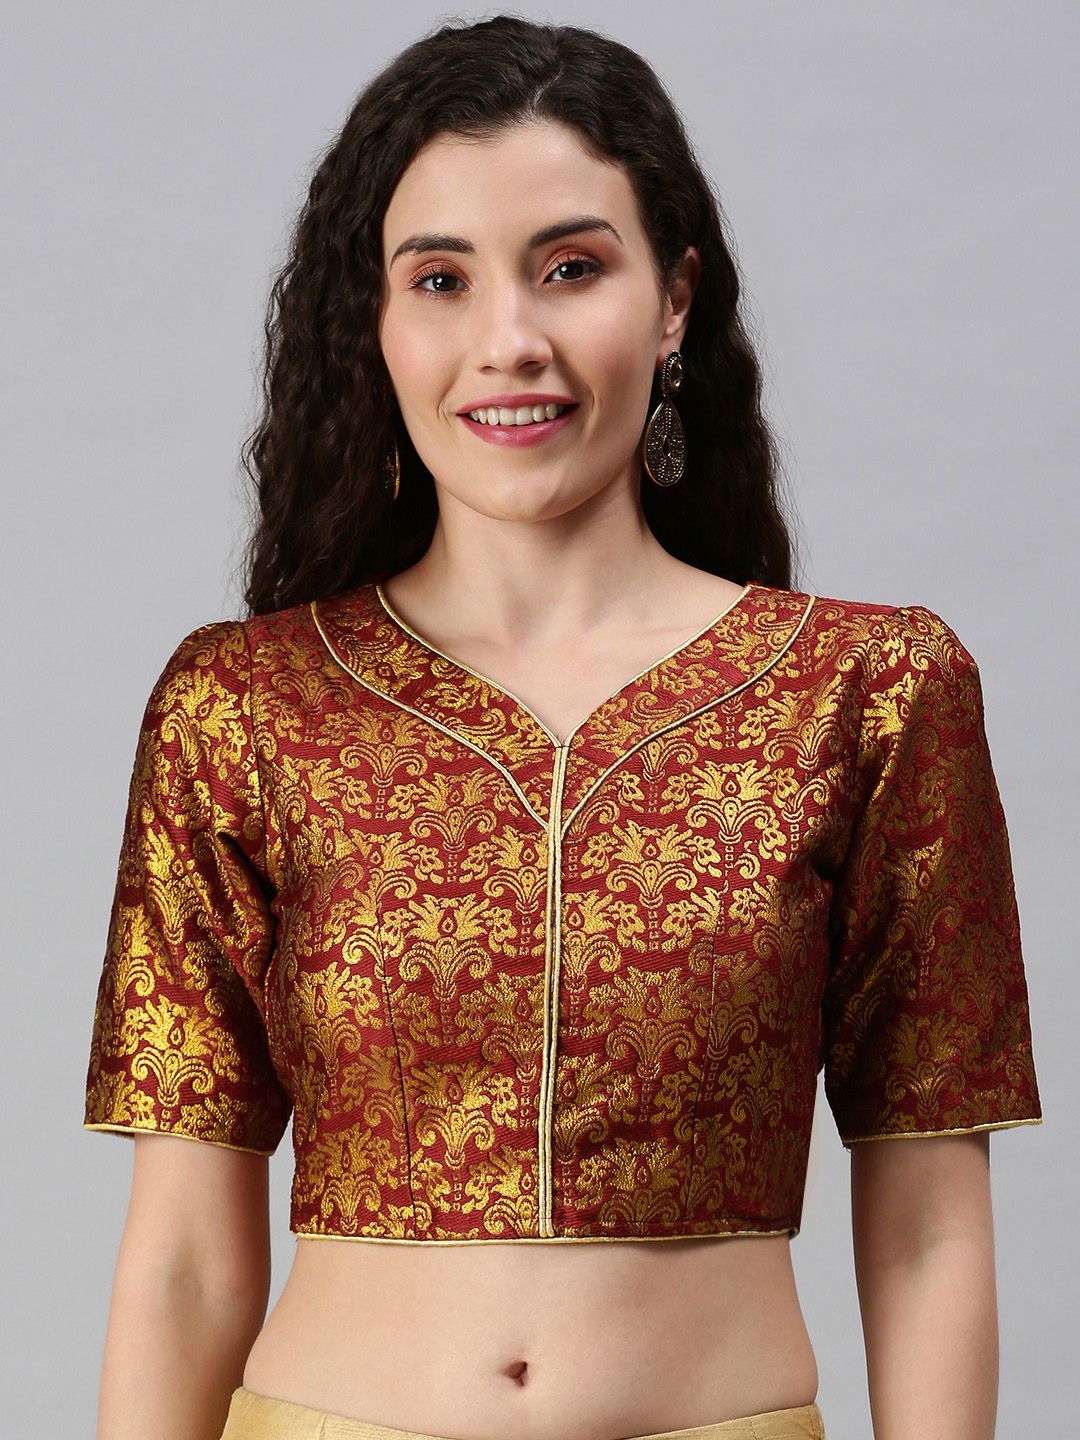 flaher Women Maroon & Golden Woven Saree Blouse Price in India